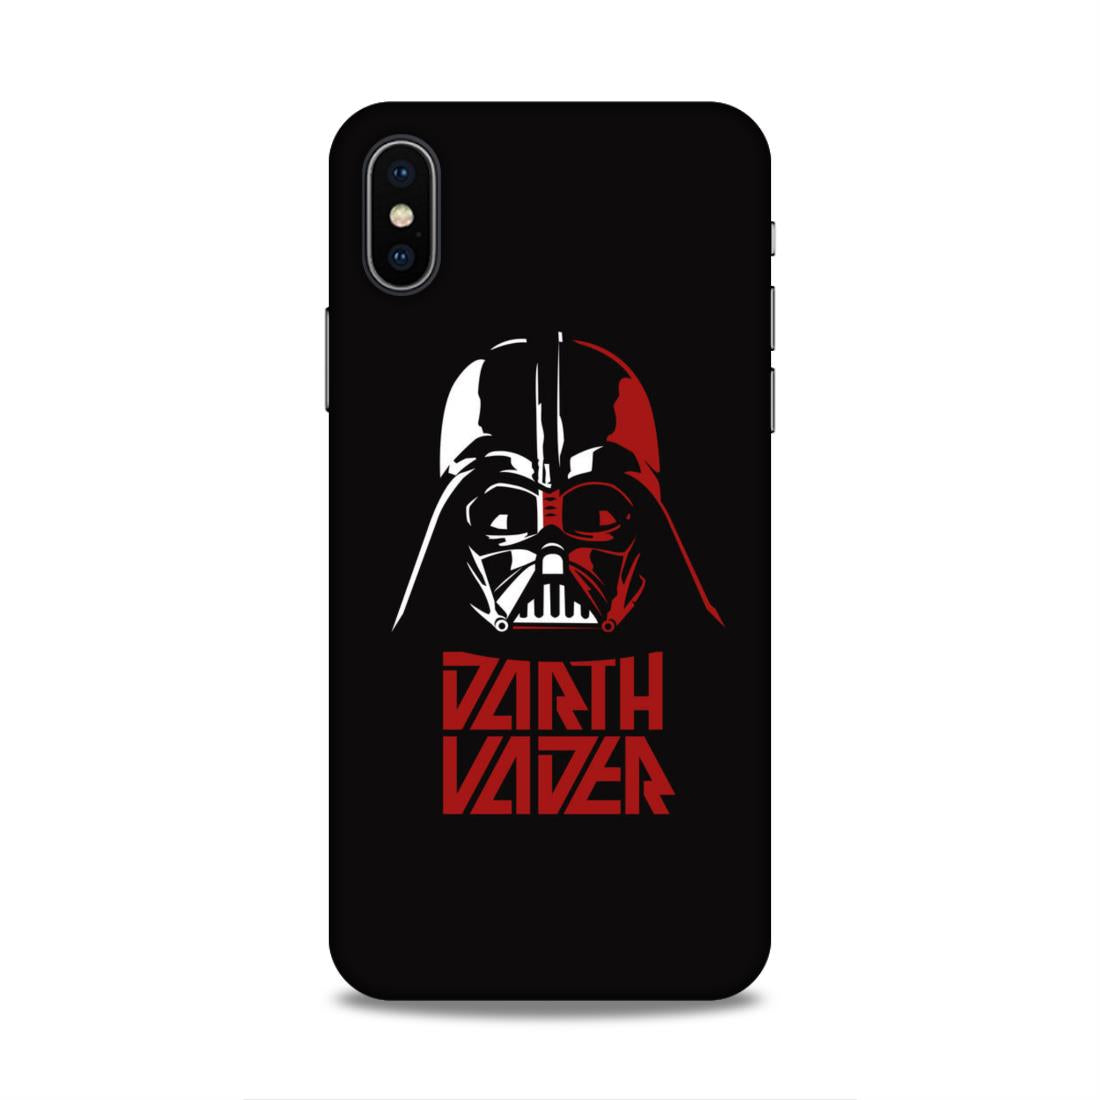 Darth Vader Hard Back Case For Apple iPhone X/XS